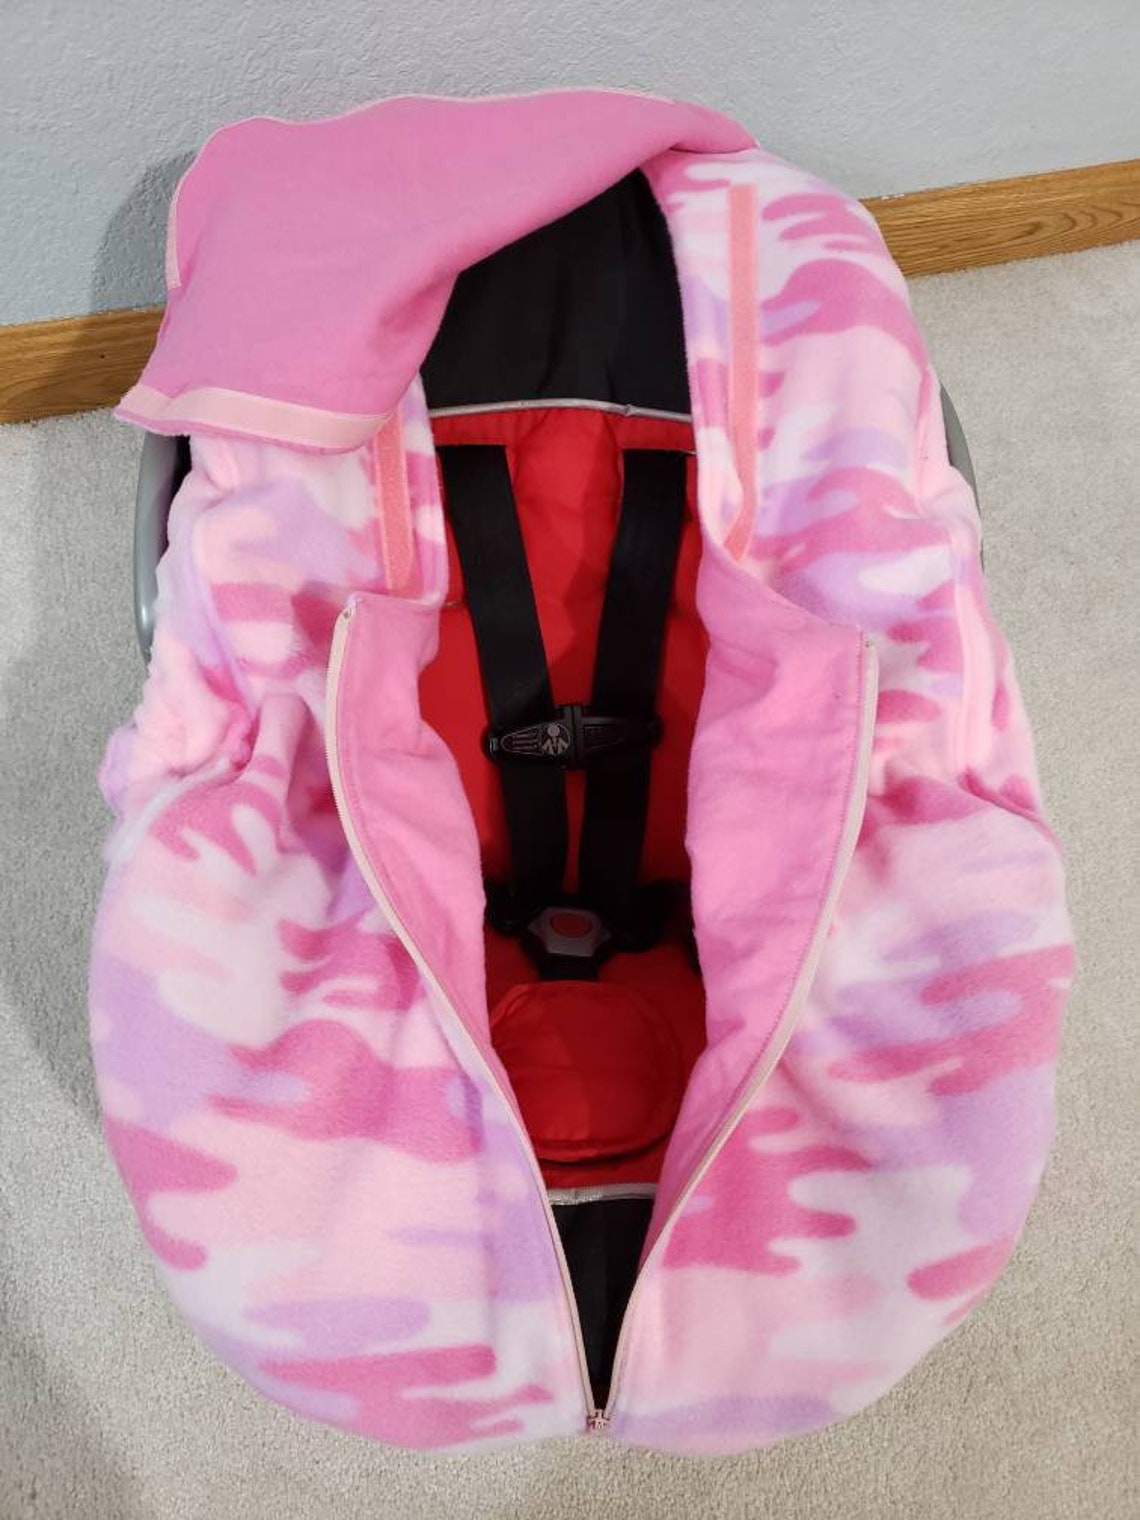 Baby Girl Car Seat Cover Infant Pink Camouflage Camo Fleece | Etsy